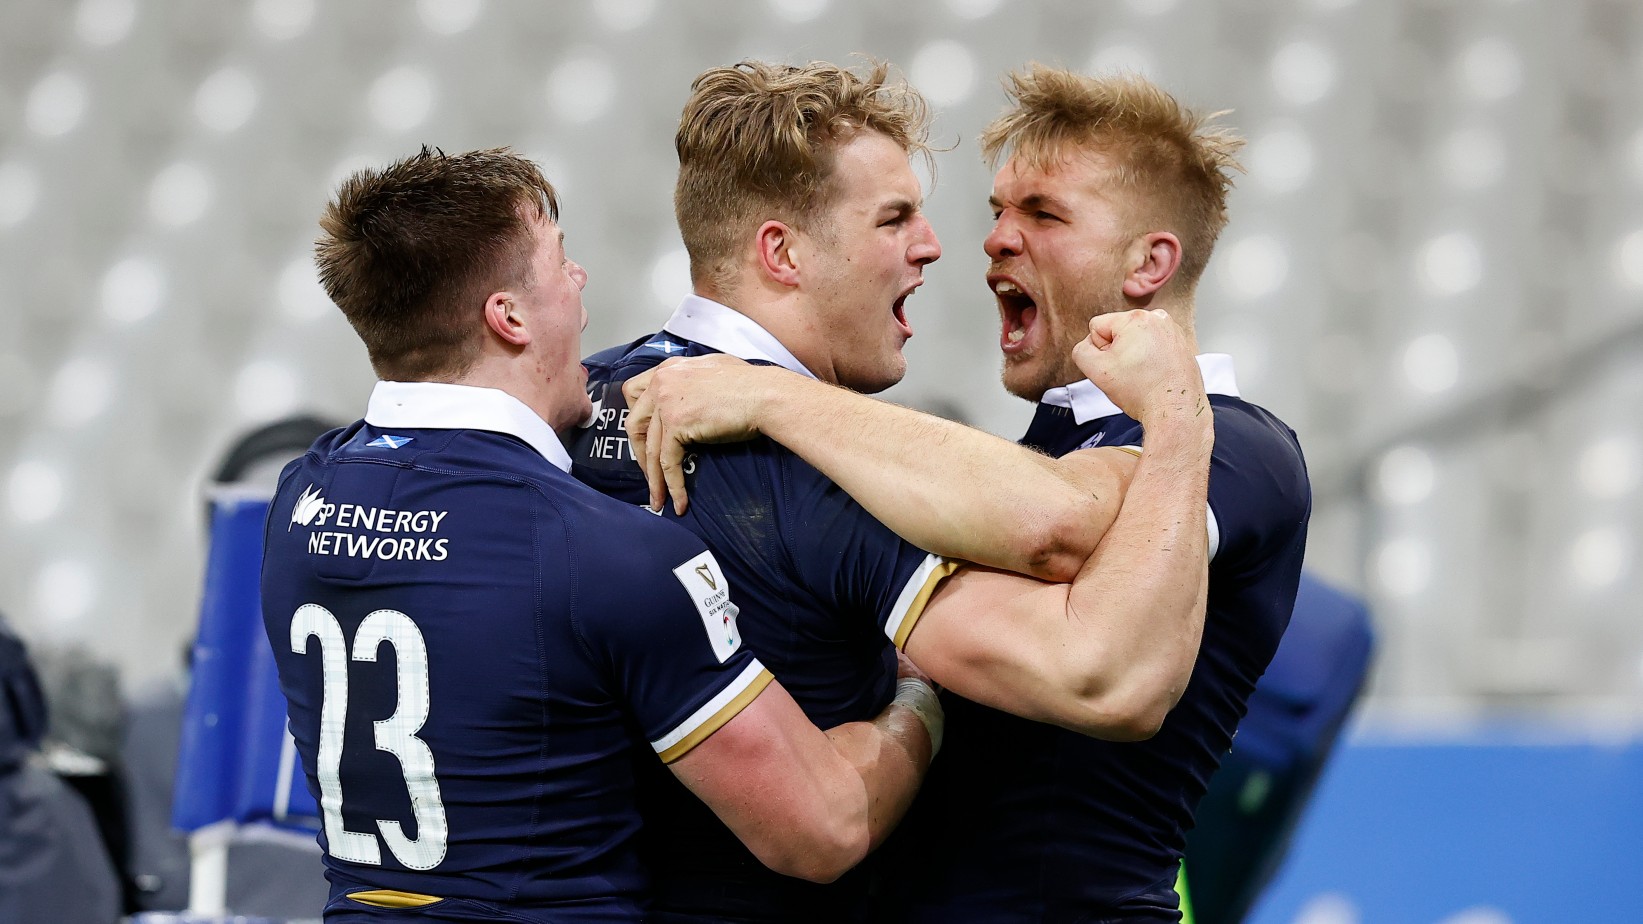 Duhan van der merwe celebrates the winning try during a Guinness Six Nations match between France and Scotland at the Stade de France, on March 26, 2021, in Paris, France. 